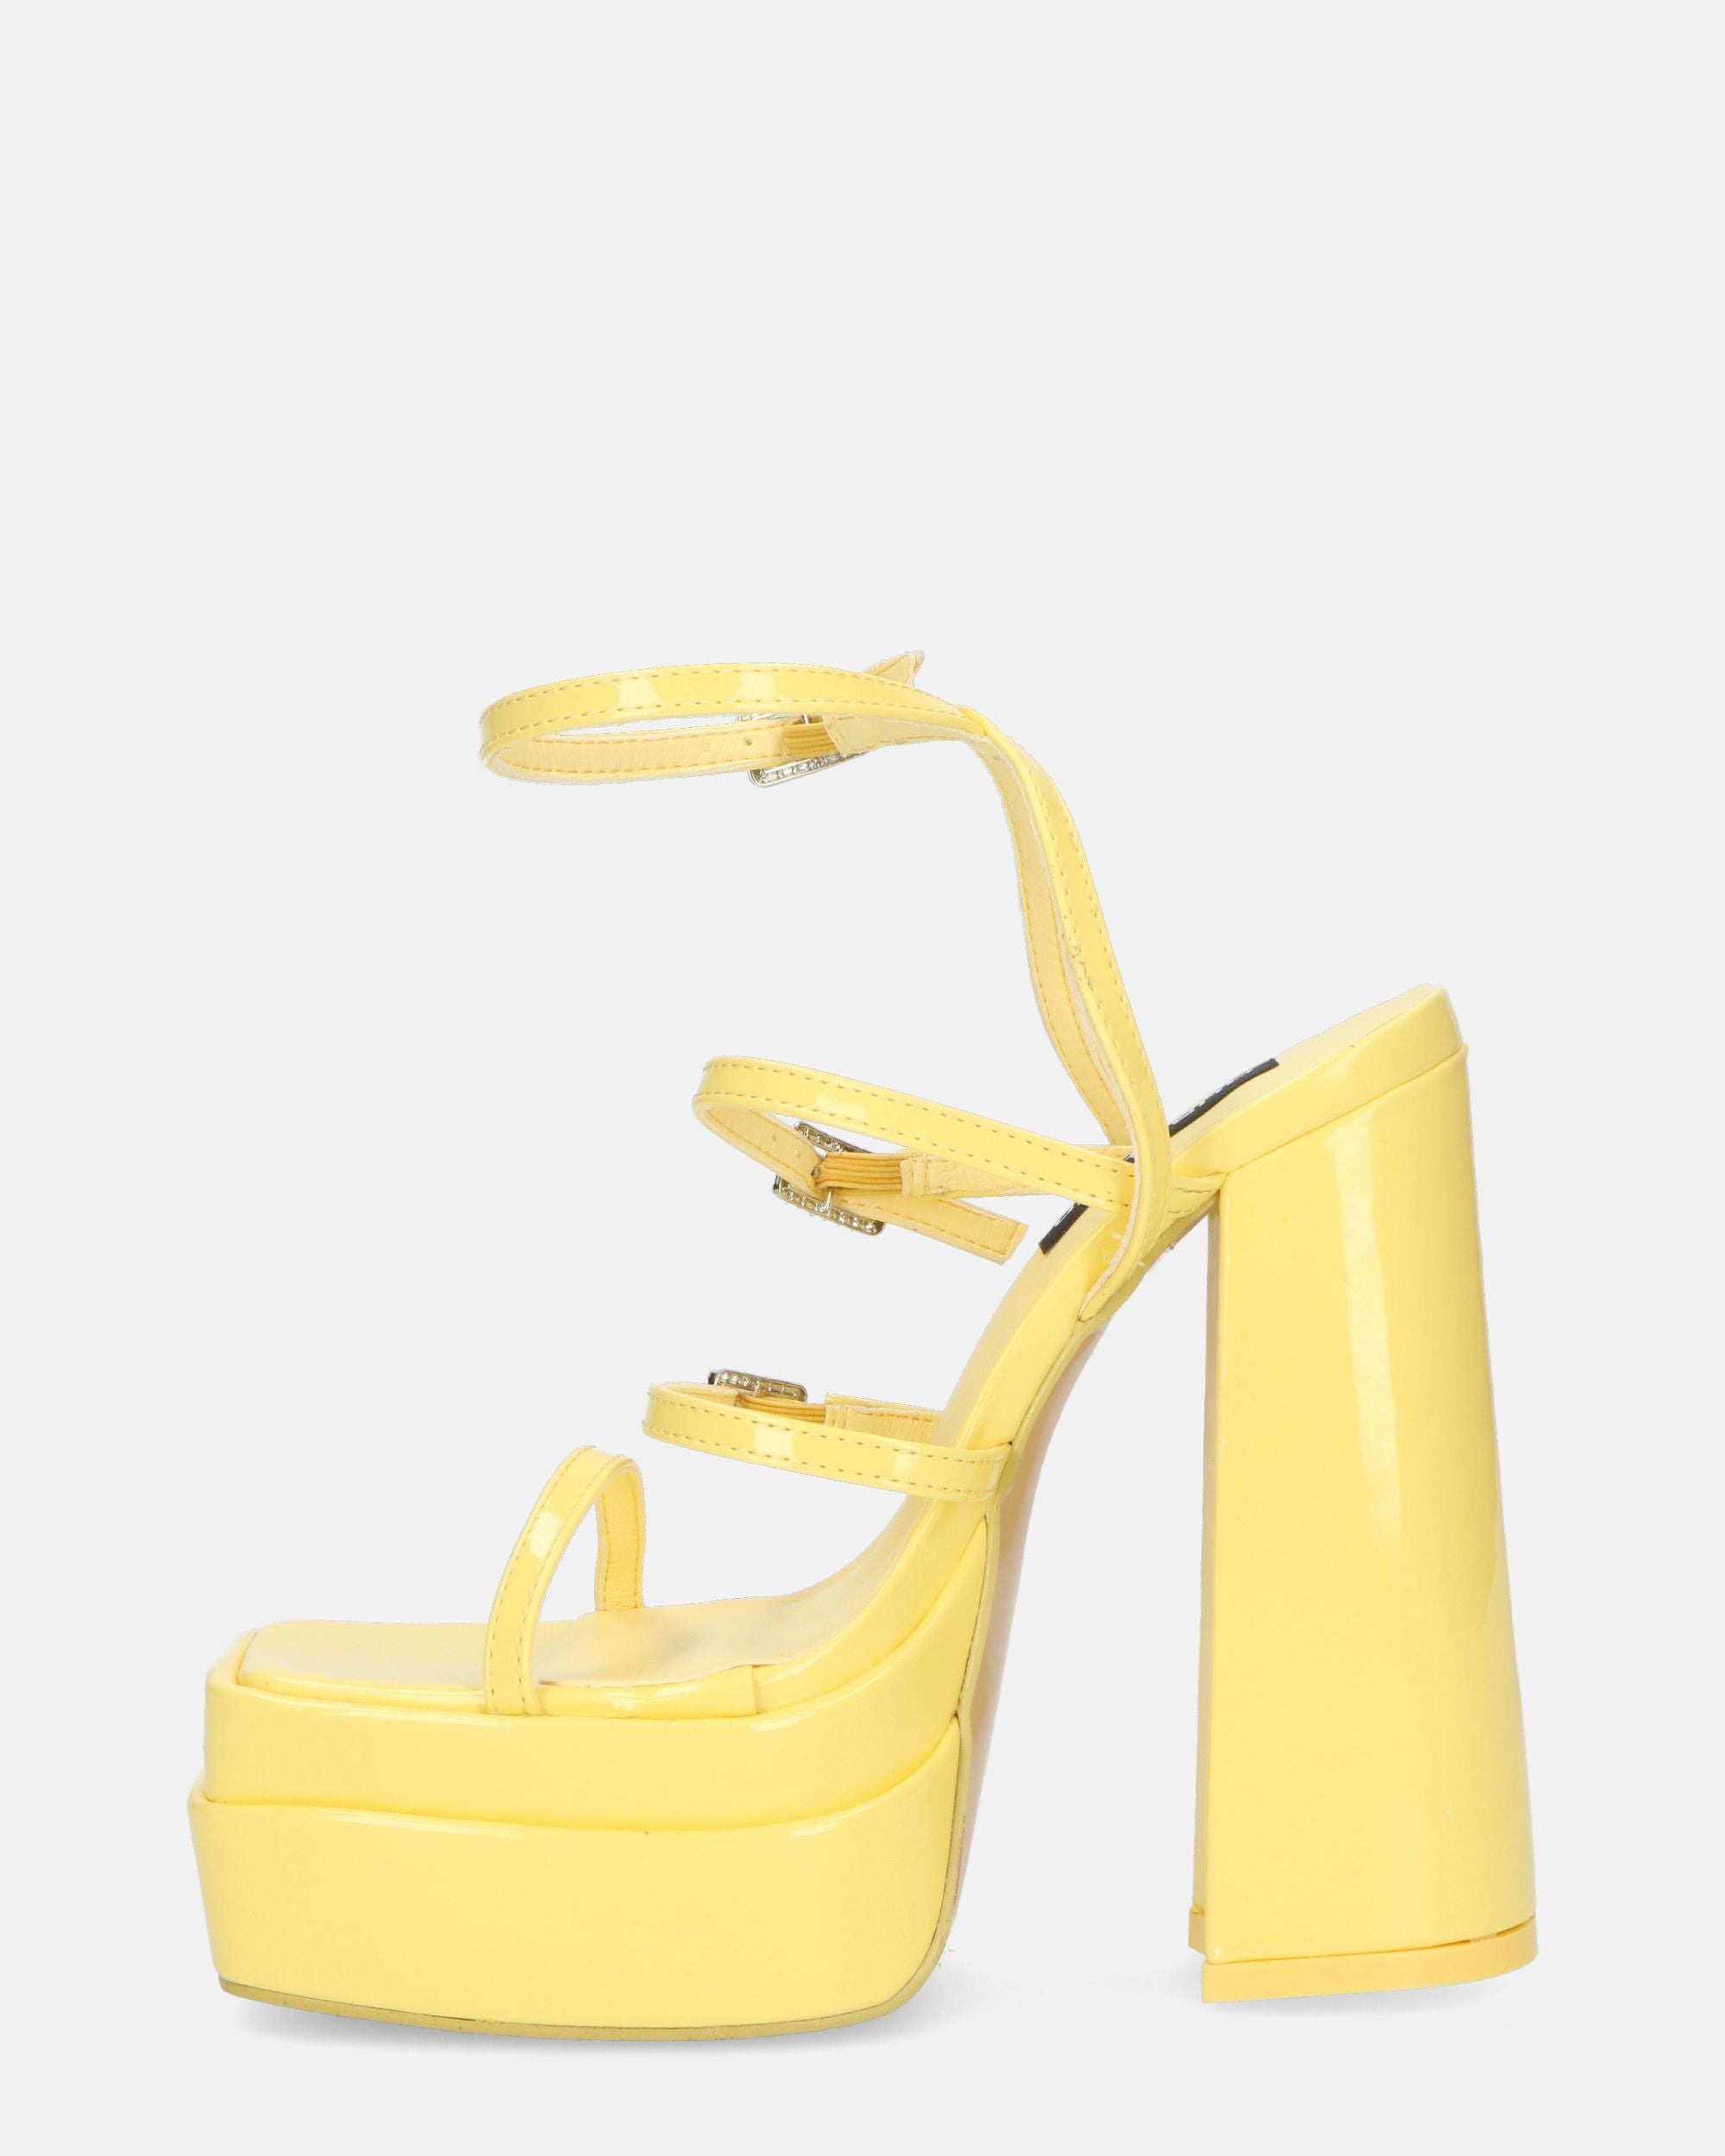 TEXA - sandals with strap and high heel in yellow